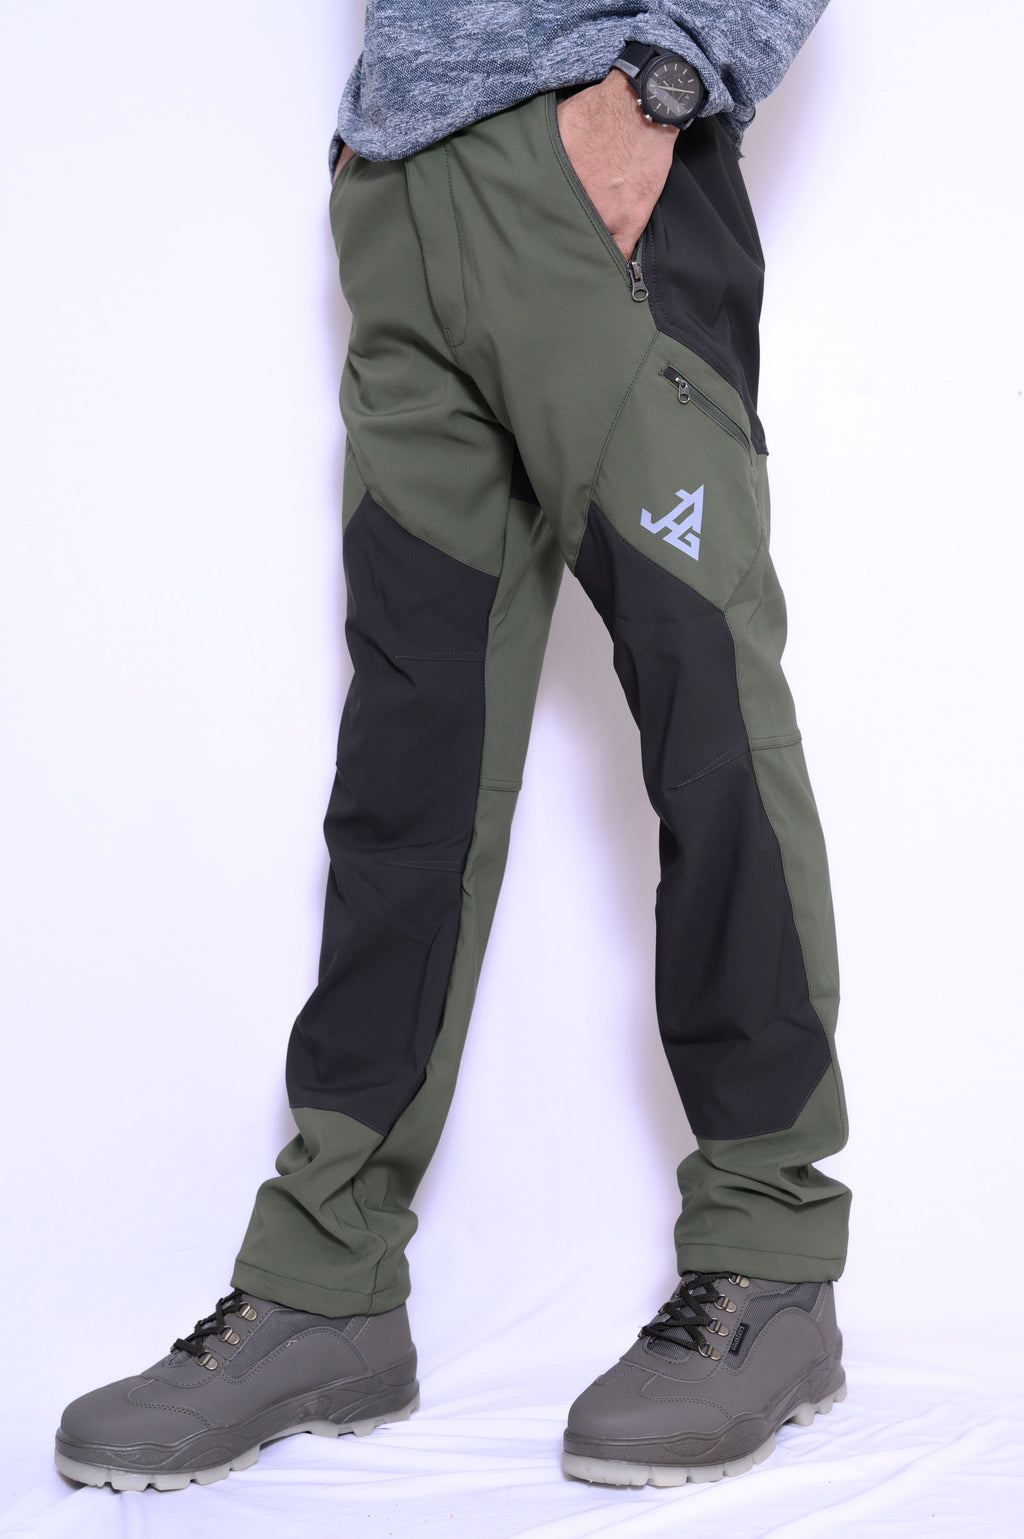 JAG Tactical Pro Series Hiking & Trekking Pant, Quick Dry